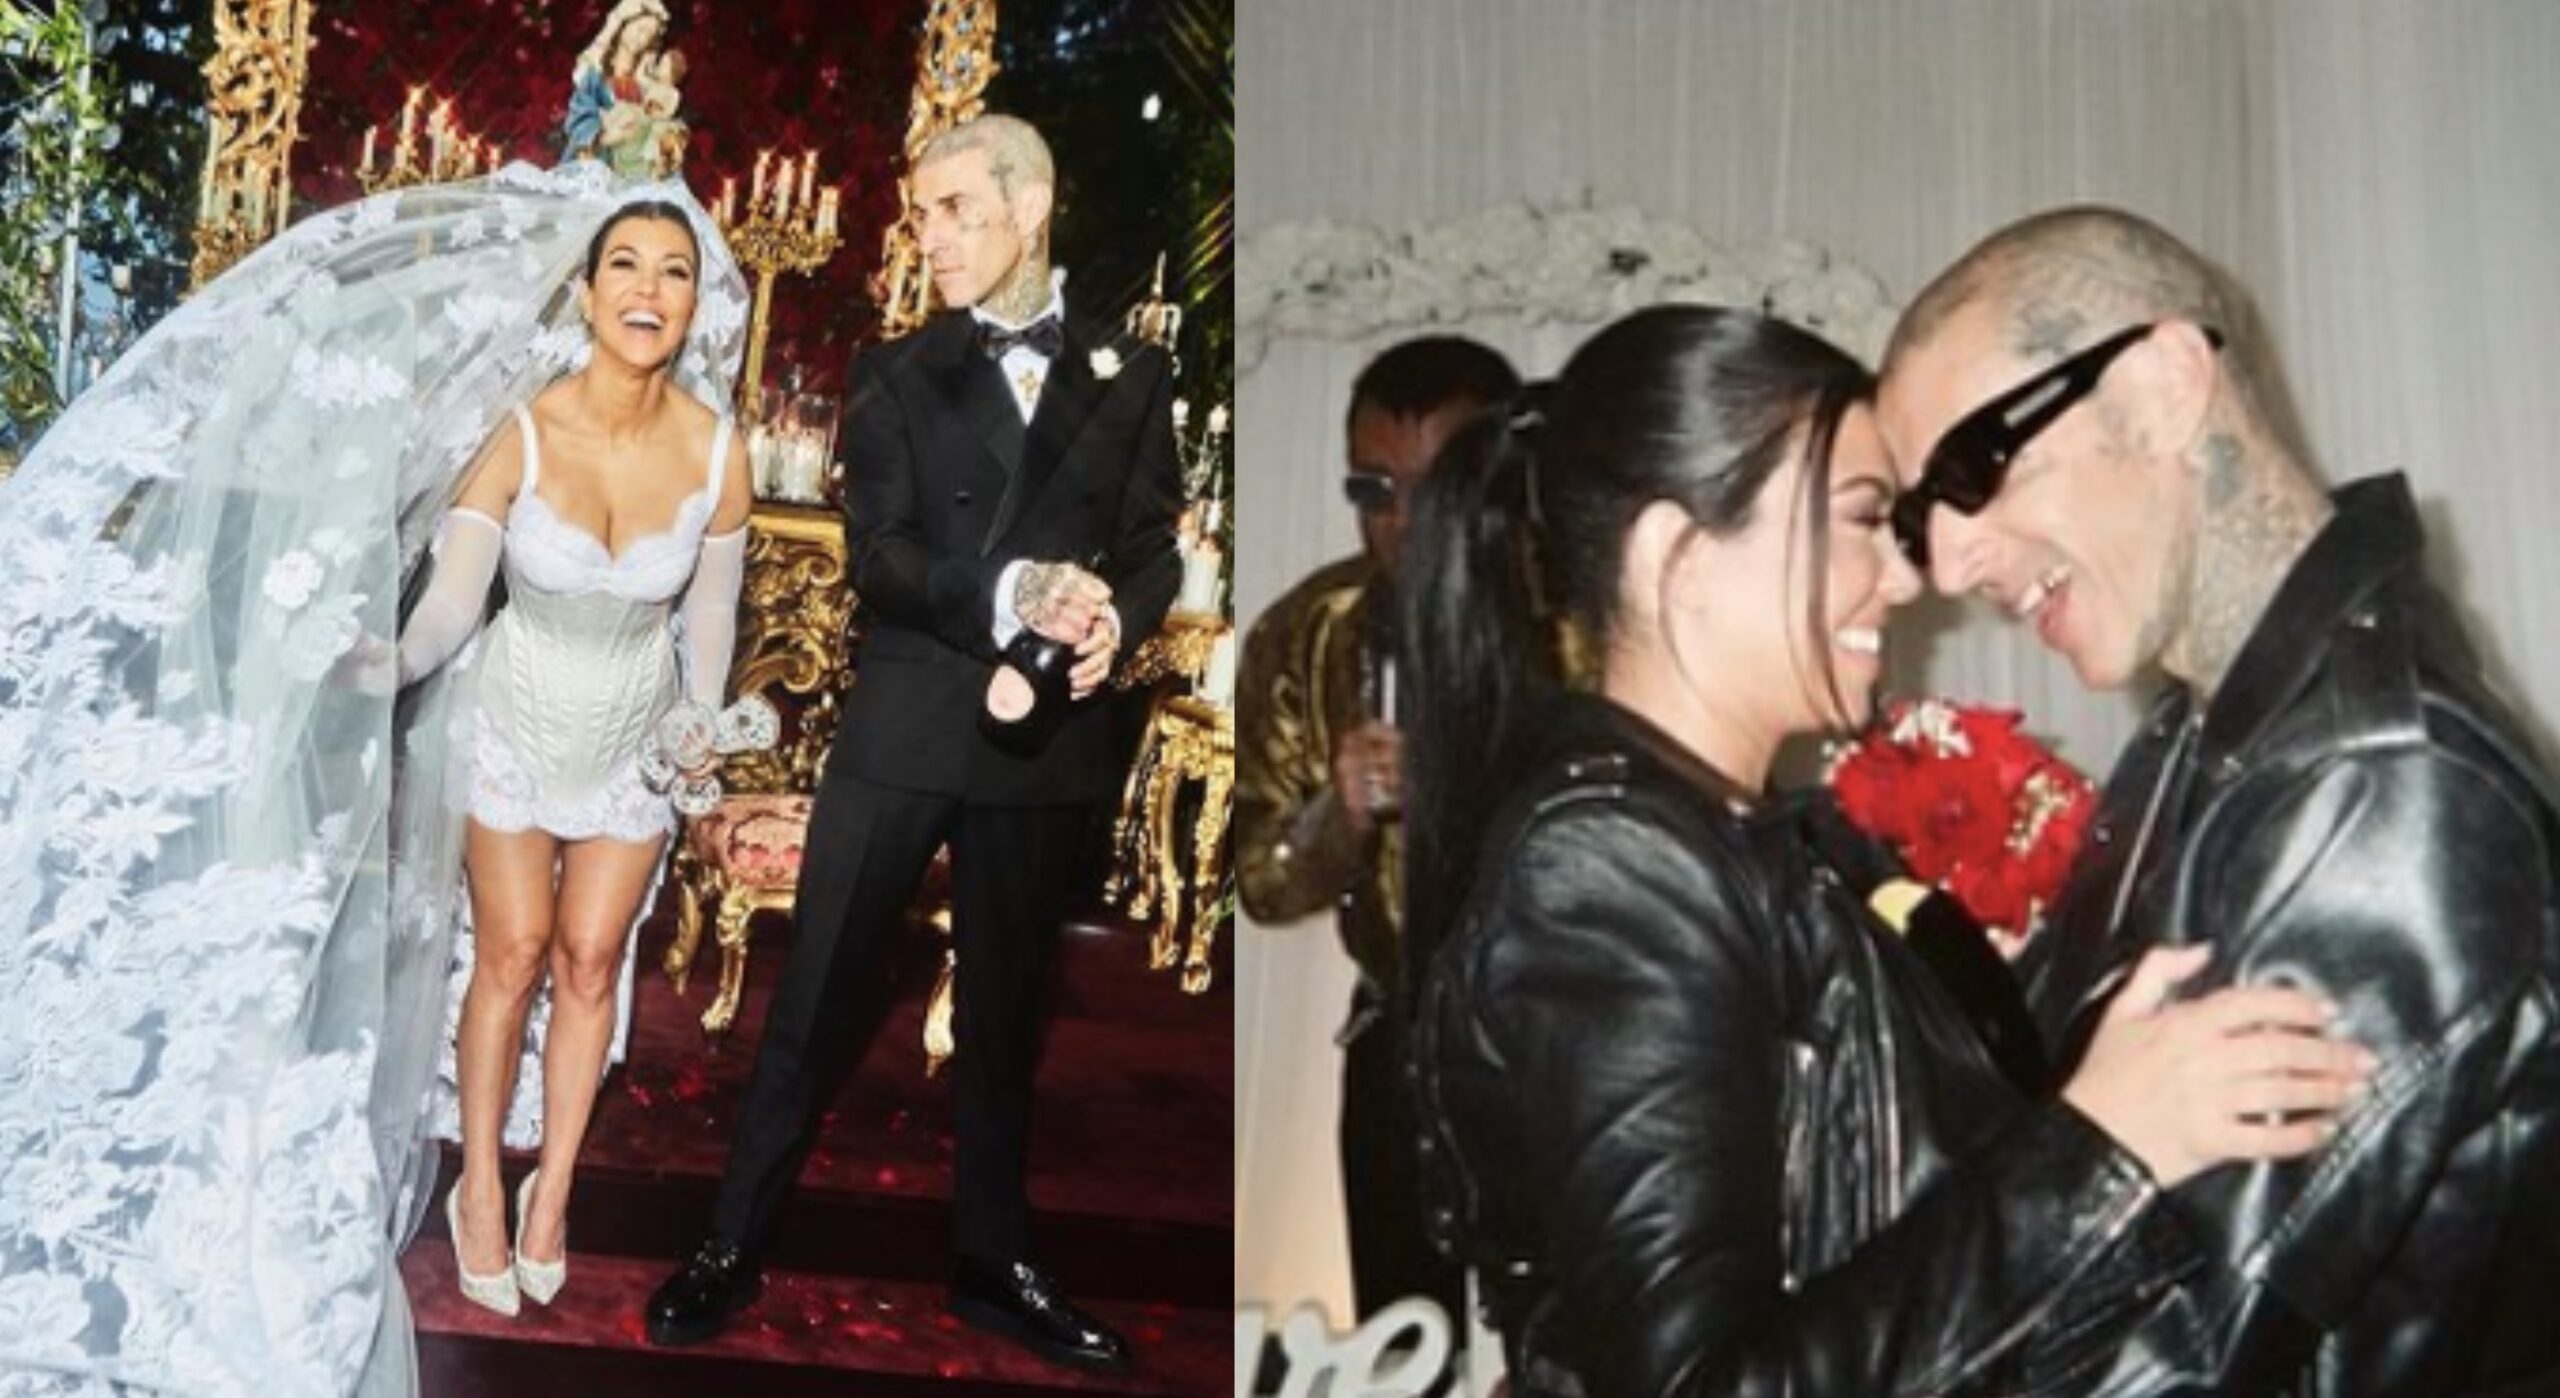 ‘Happily ever after’: Travis Barker, Kourtney Kardashian are officially married